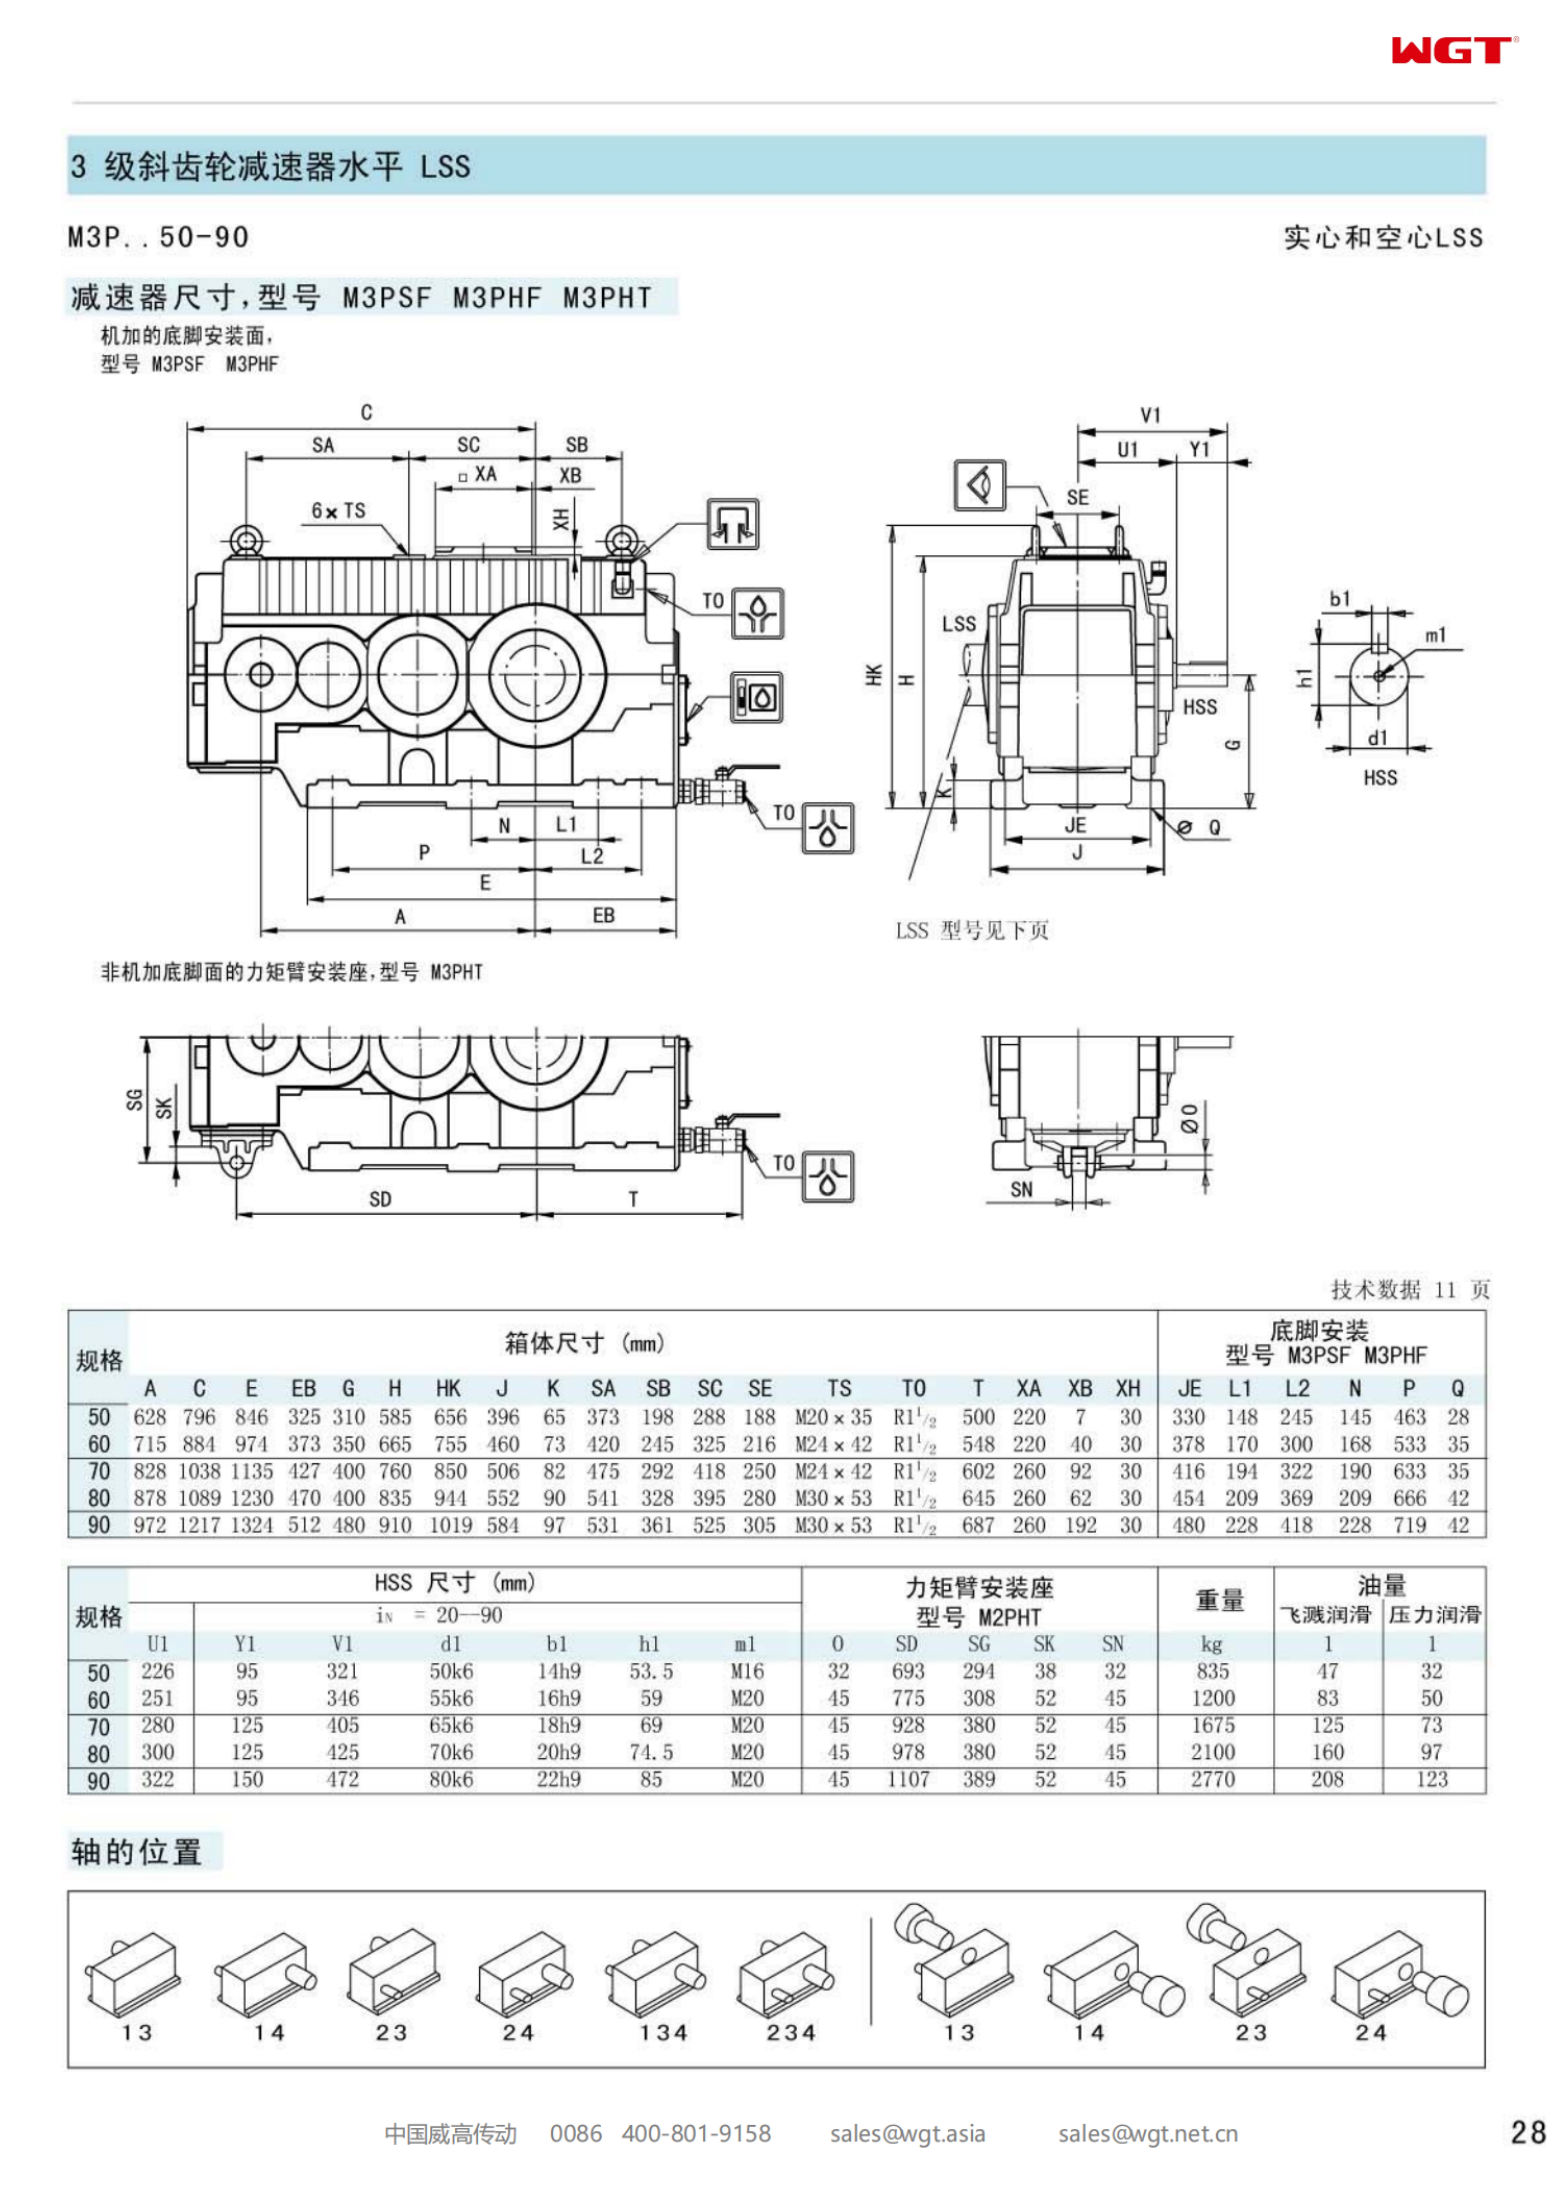 M3PSF80 Replace_SEW_M_Series Gearbox